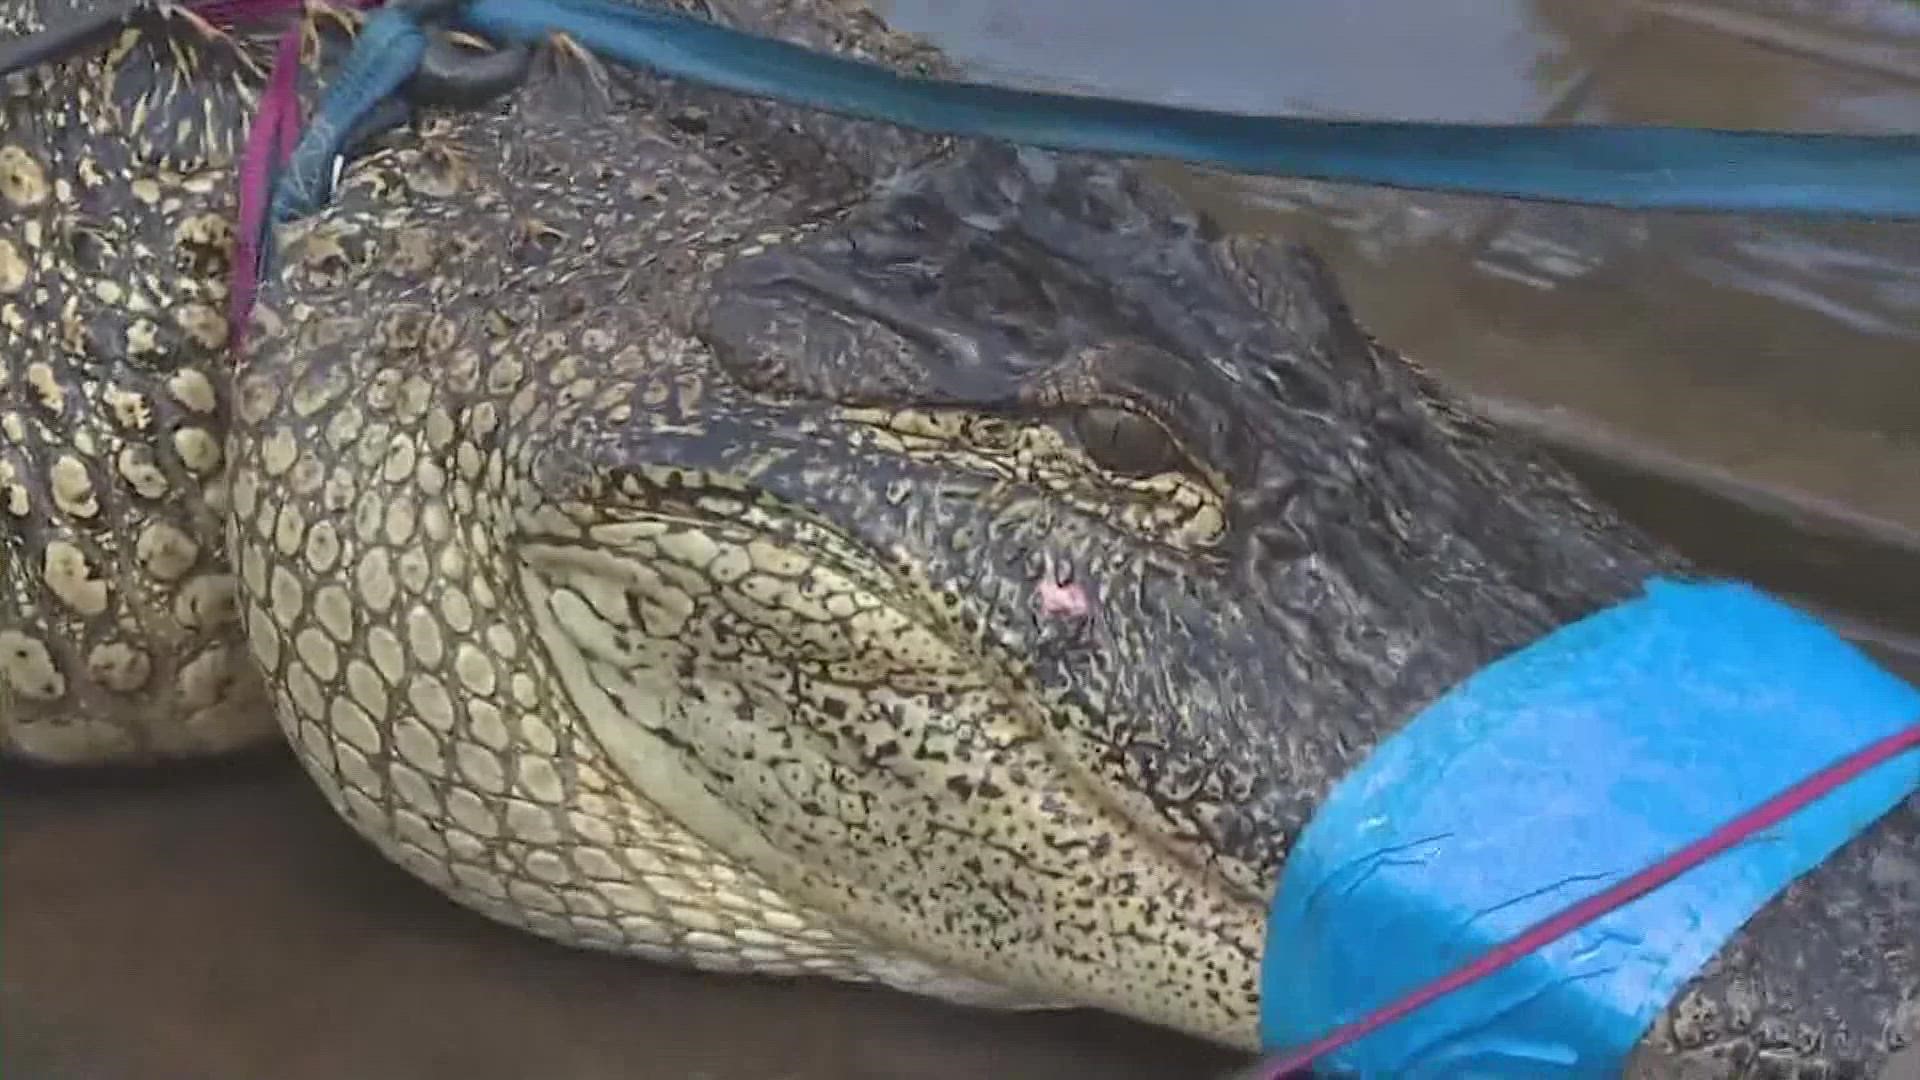 Texas Parks and Wildlife was called to the scene to capture the gator and take it to a more suitable habitat.